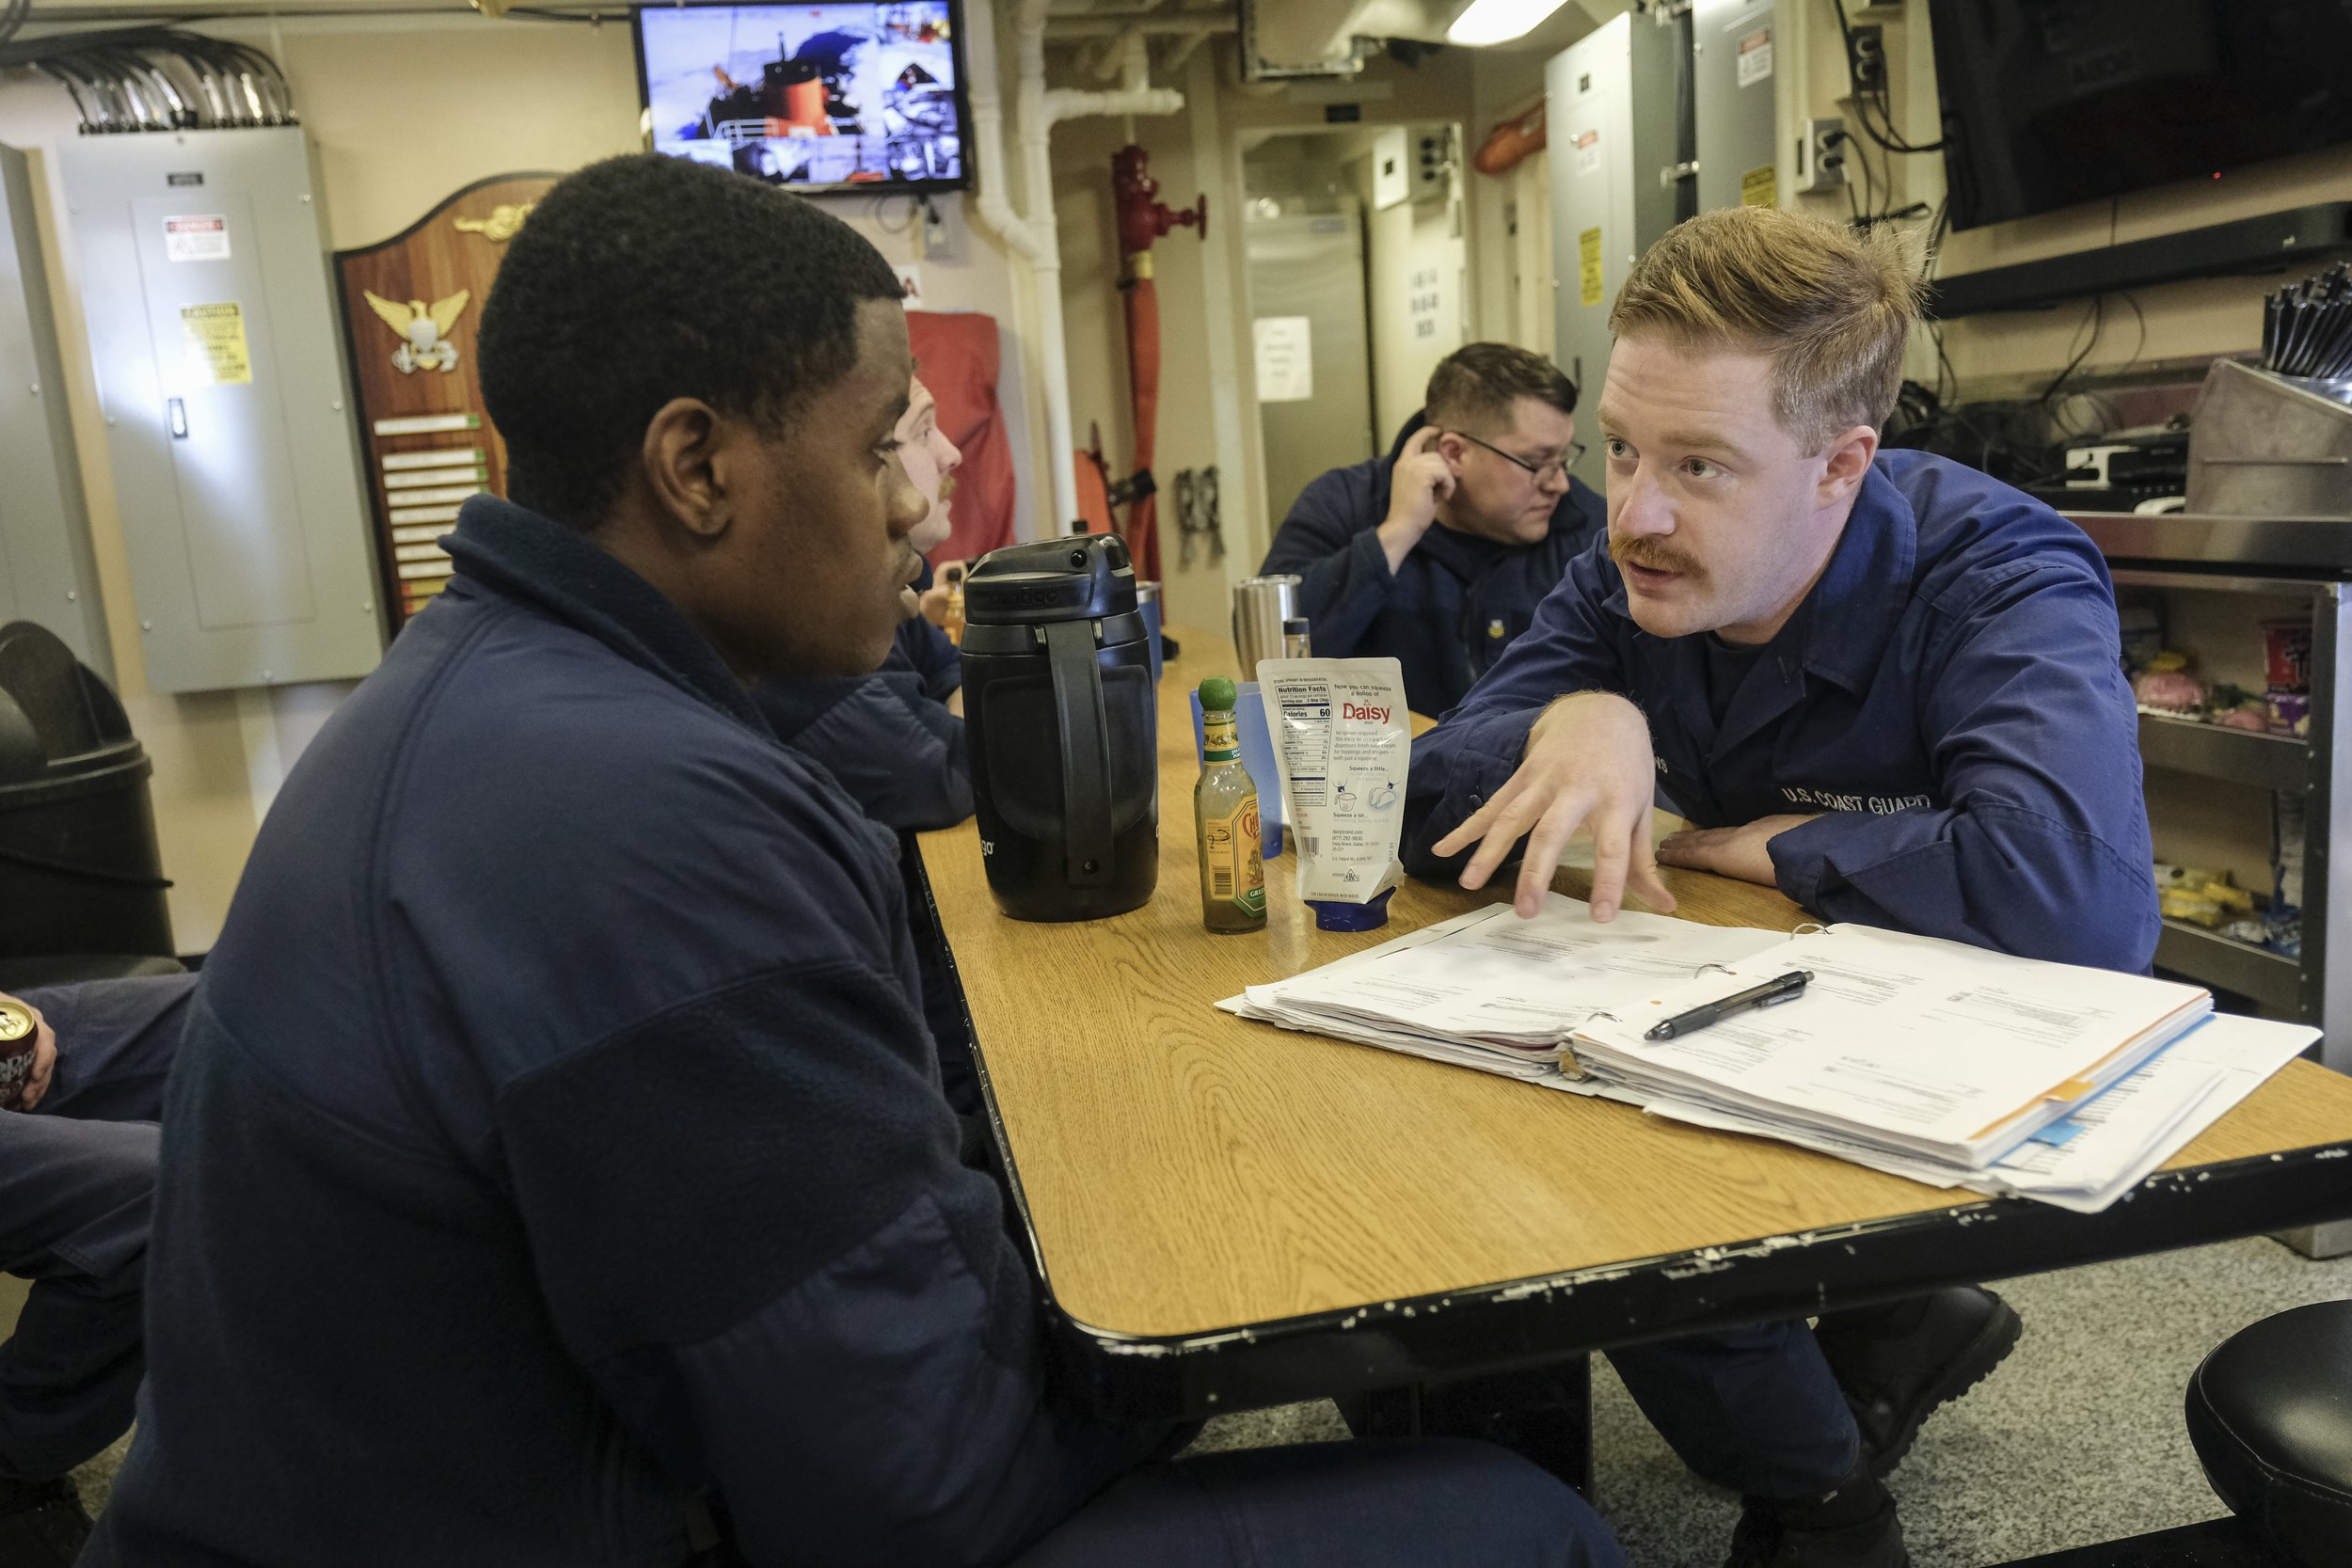  Seaman (SN) Tyler Hutchins helps SN Dayan R Caron Marcus study for a test about Damage Control while on an Ice Breaking operation in the St. Mary's River on Tuesday, March 14, 2023 aboard the US Coast Guard Cutter 'Katmai Bay;. The Katmai Bay is one